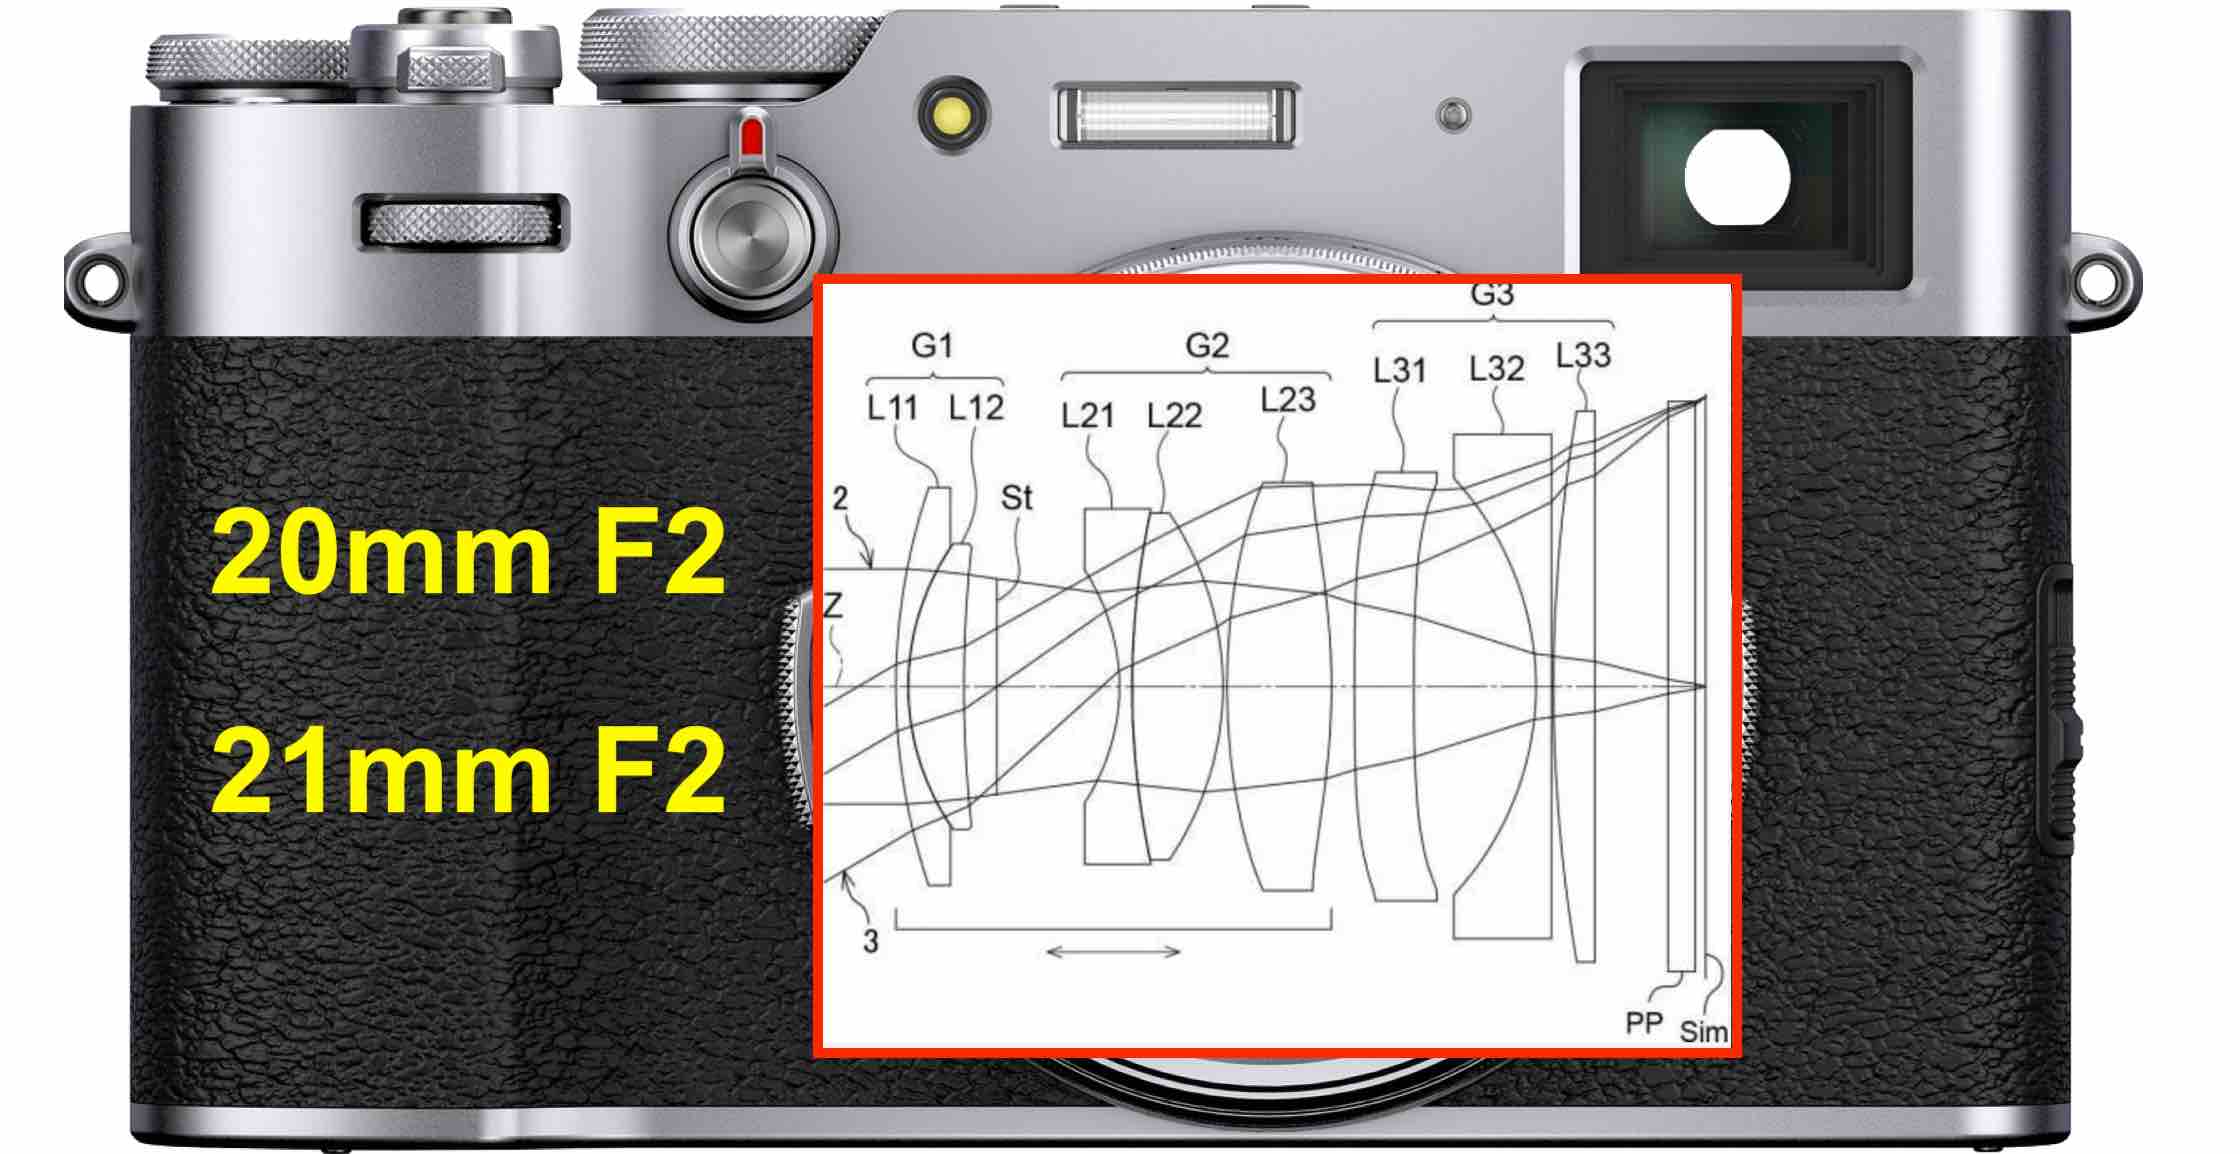 Fujifilm X100 with 20mmF2 and 21mmF2 Lens Patent Spotted - Fuji Rumors